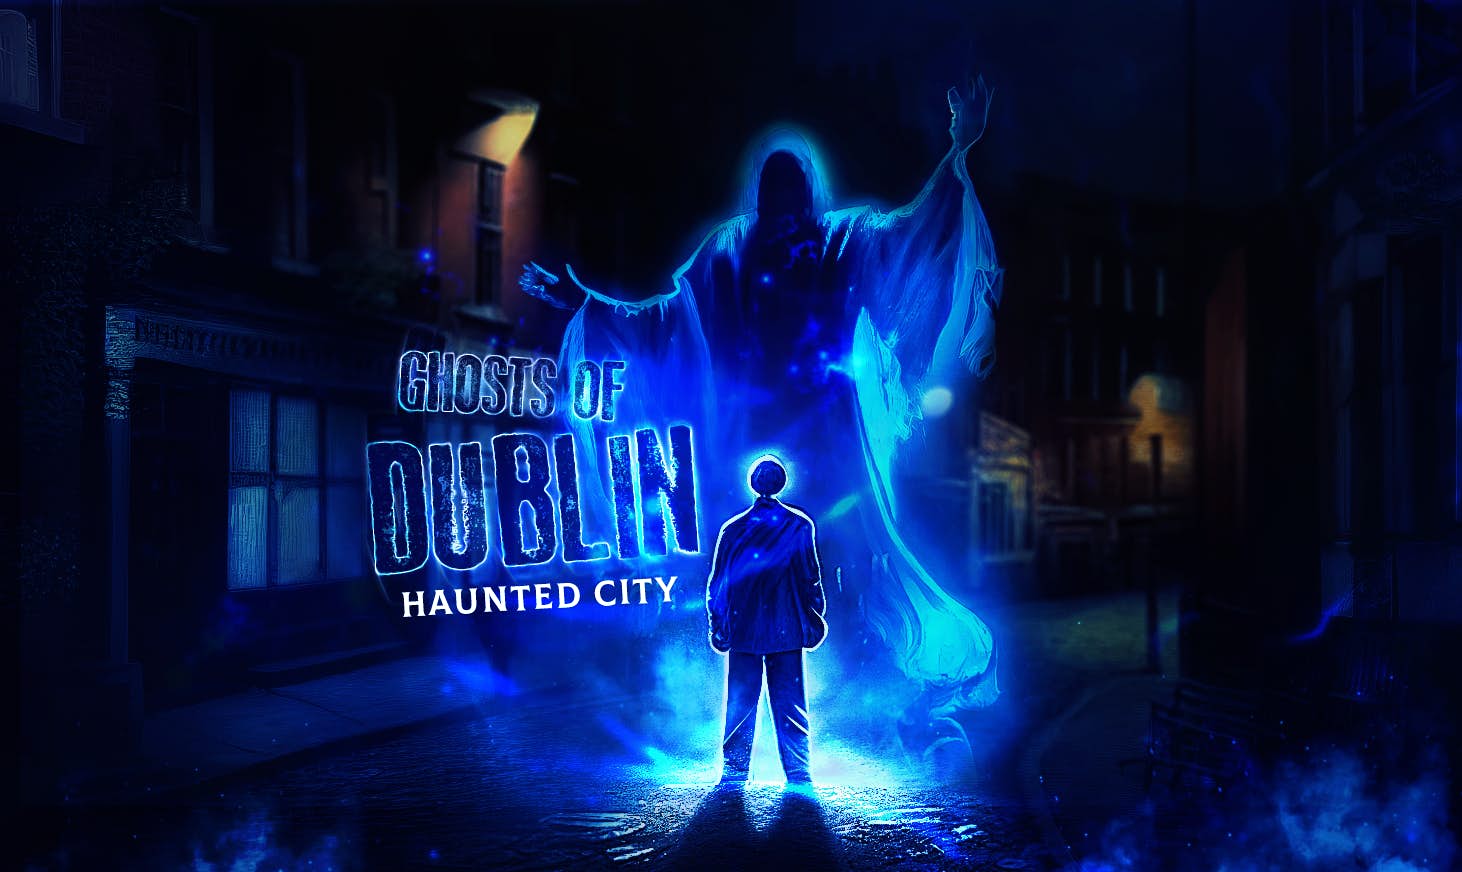 Ghosts of Dublin: Haunted City image